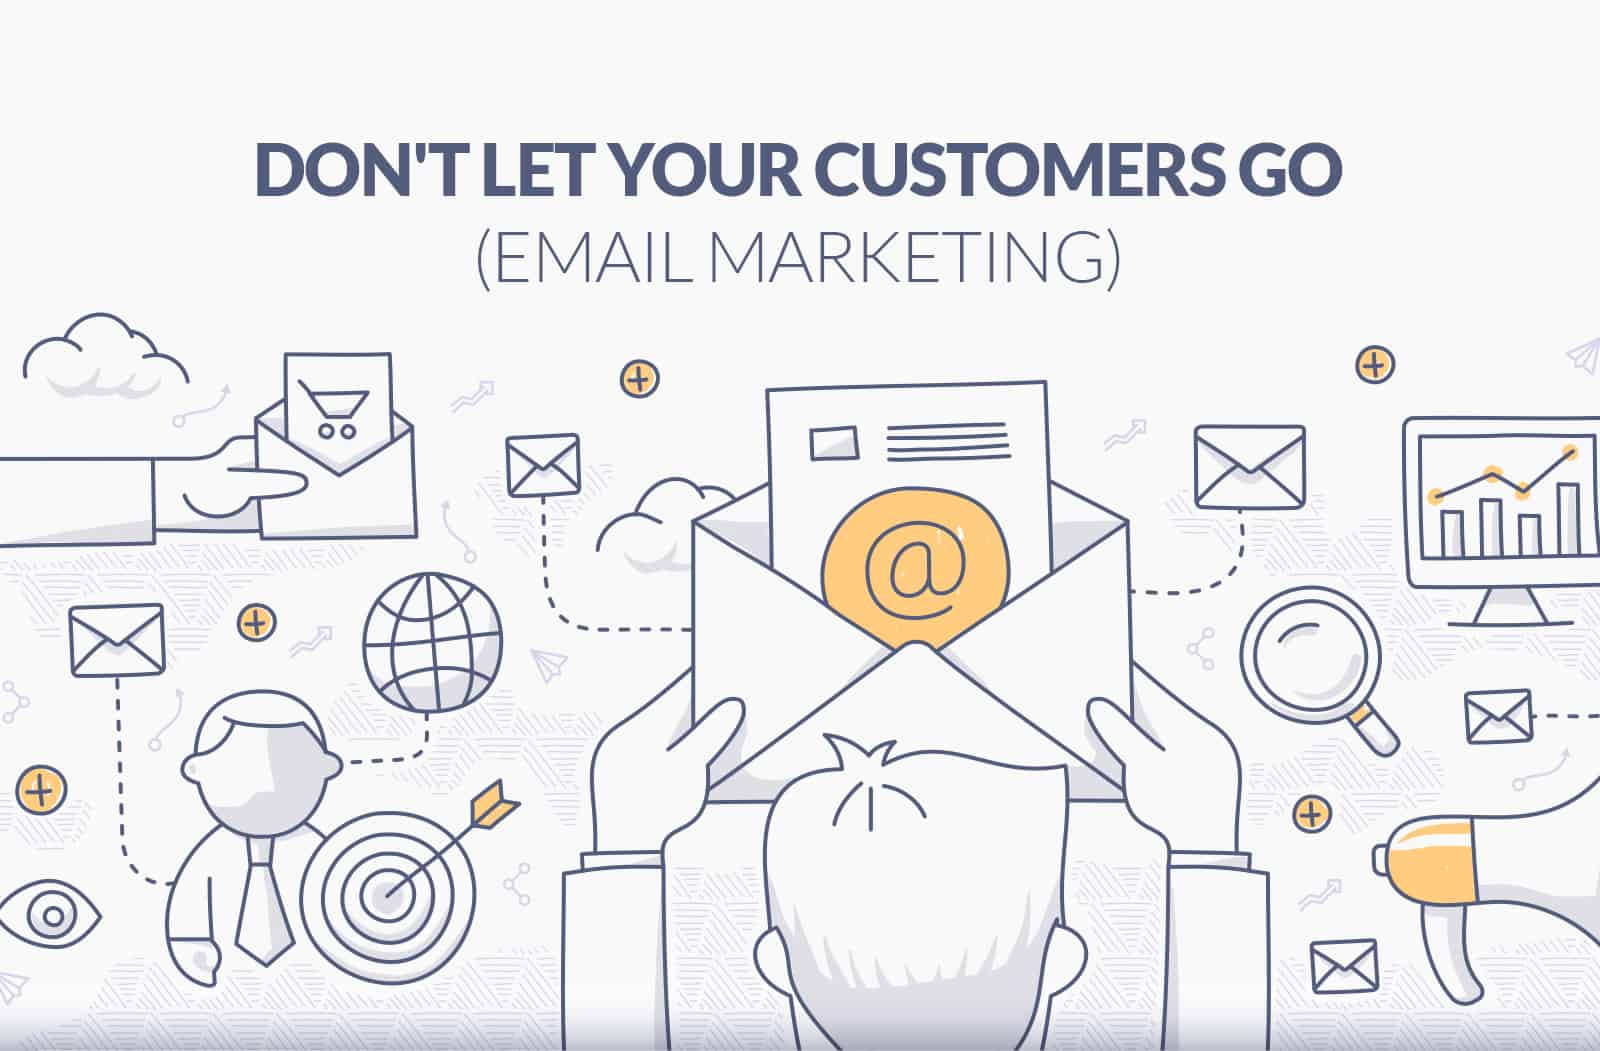 Automated Email Marketing